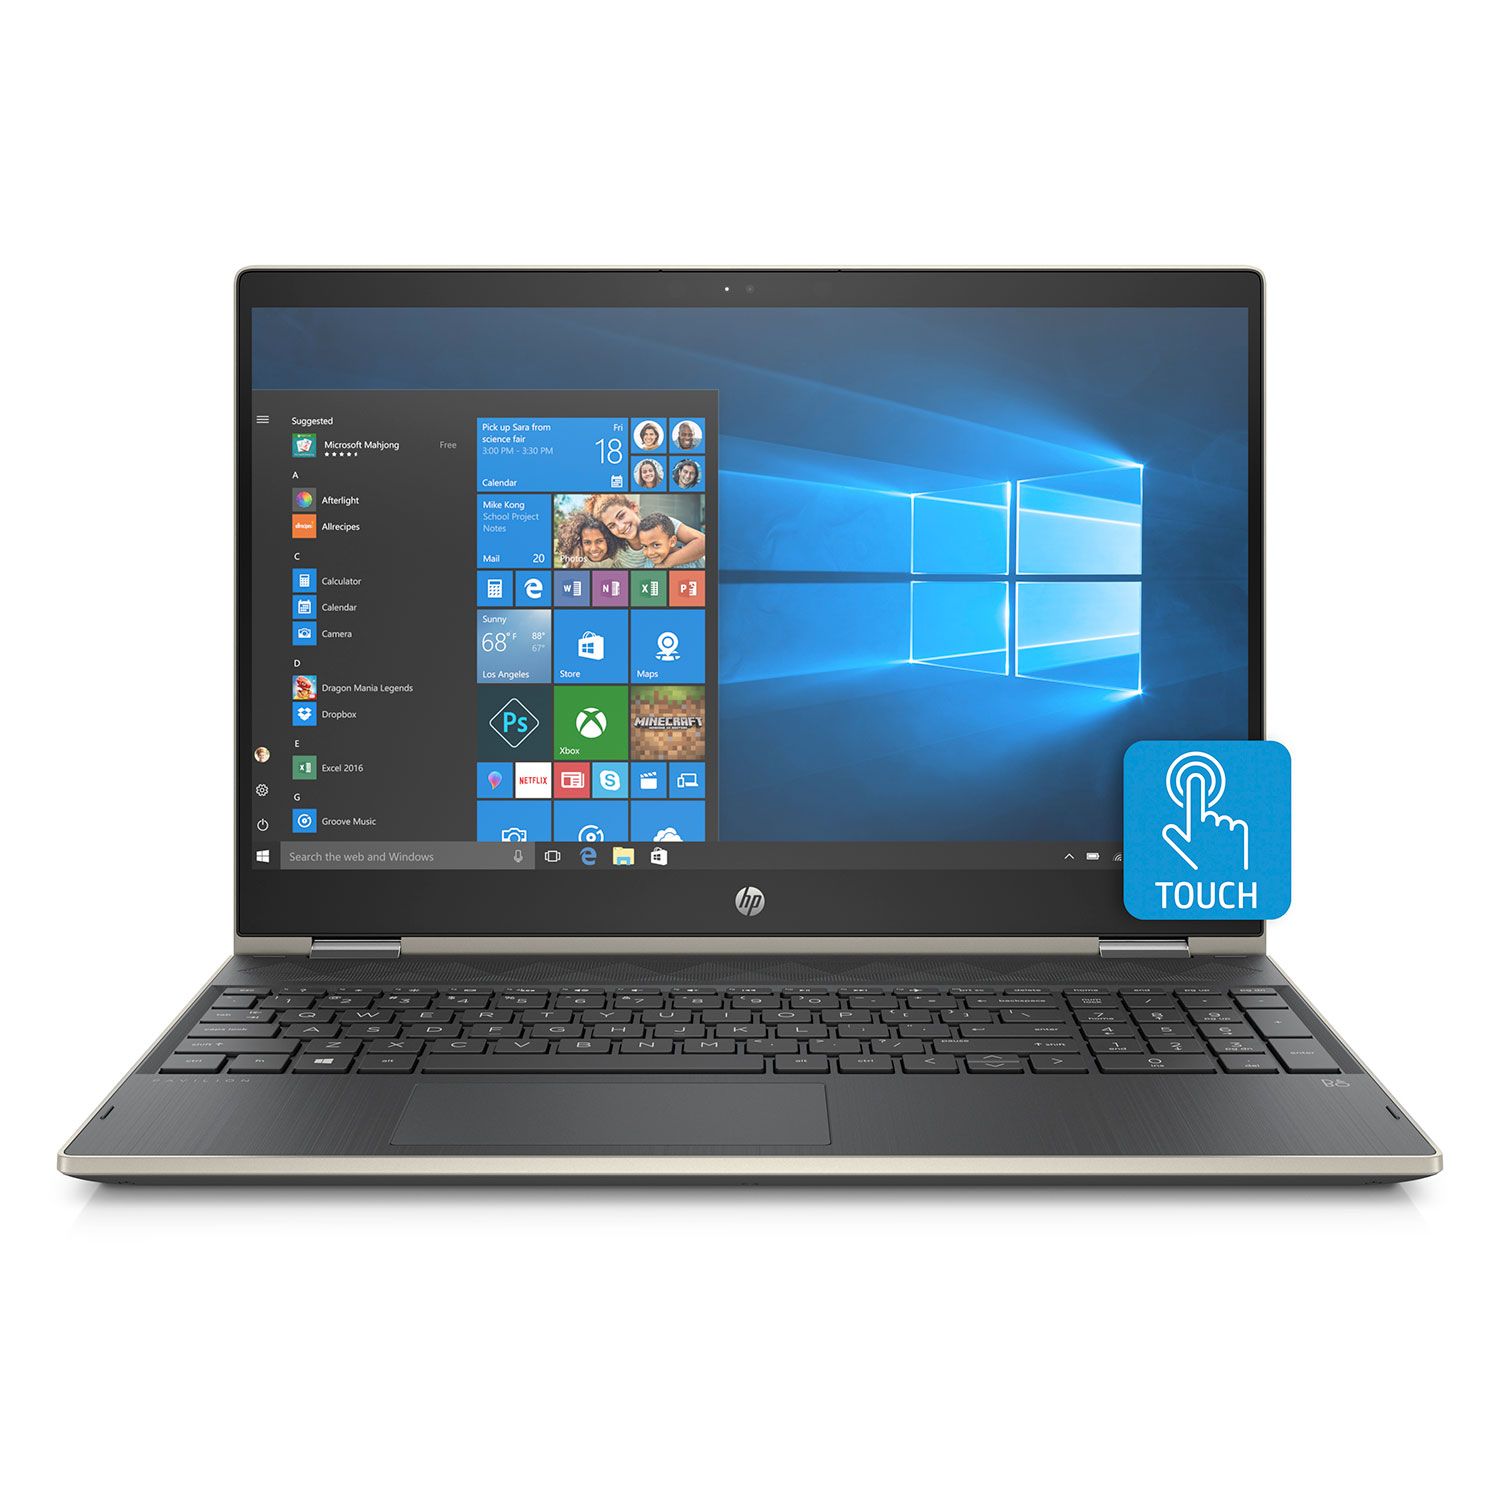 HP Pavilion X360 15-cr0085cl 15.6″ Convertible Touch laptop, 8th Gen Core i7, 24GB RAM, 1TB HDD